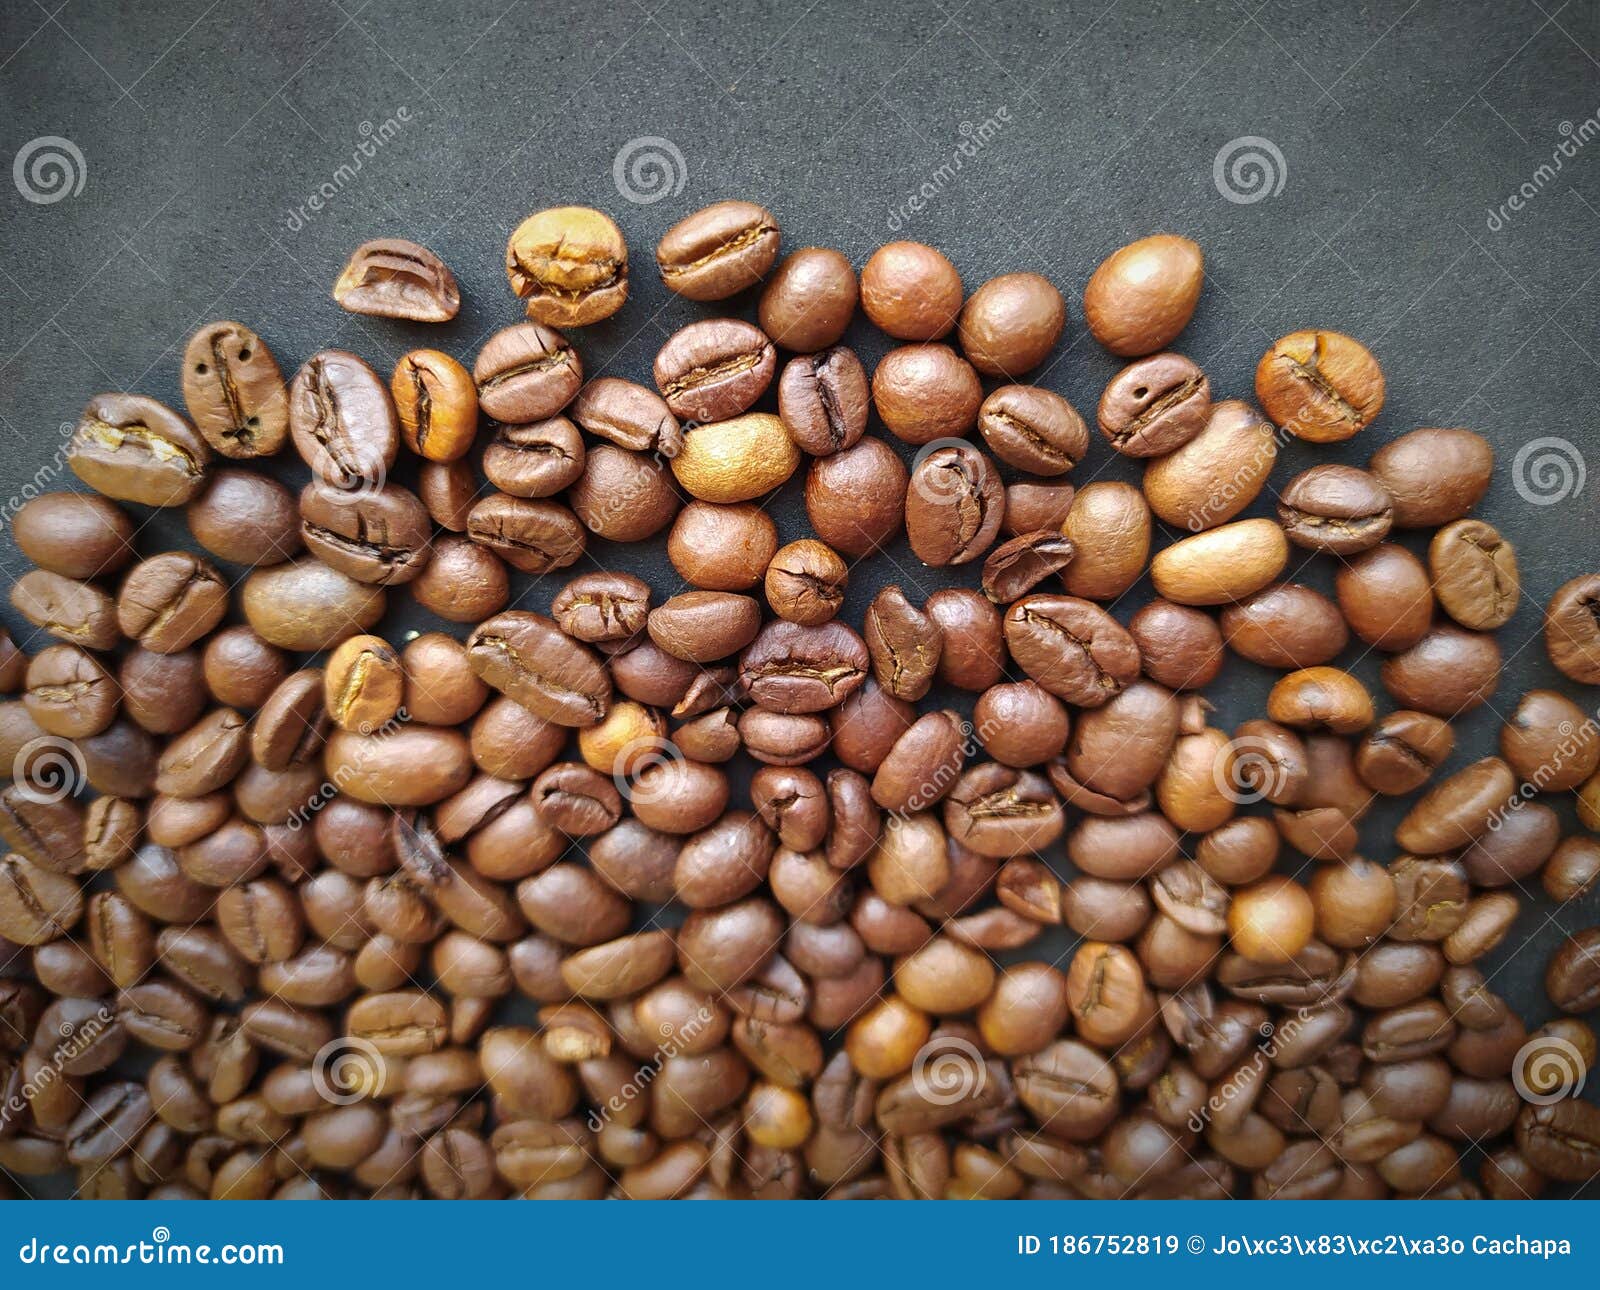 beautiful coffee beans in bacground